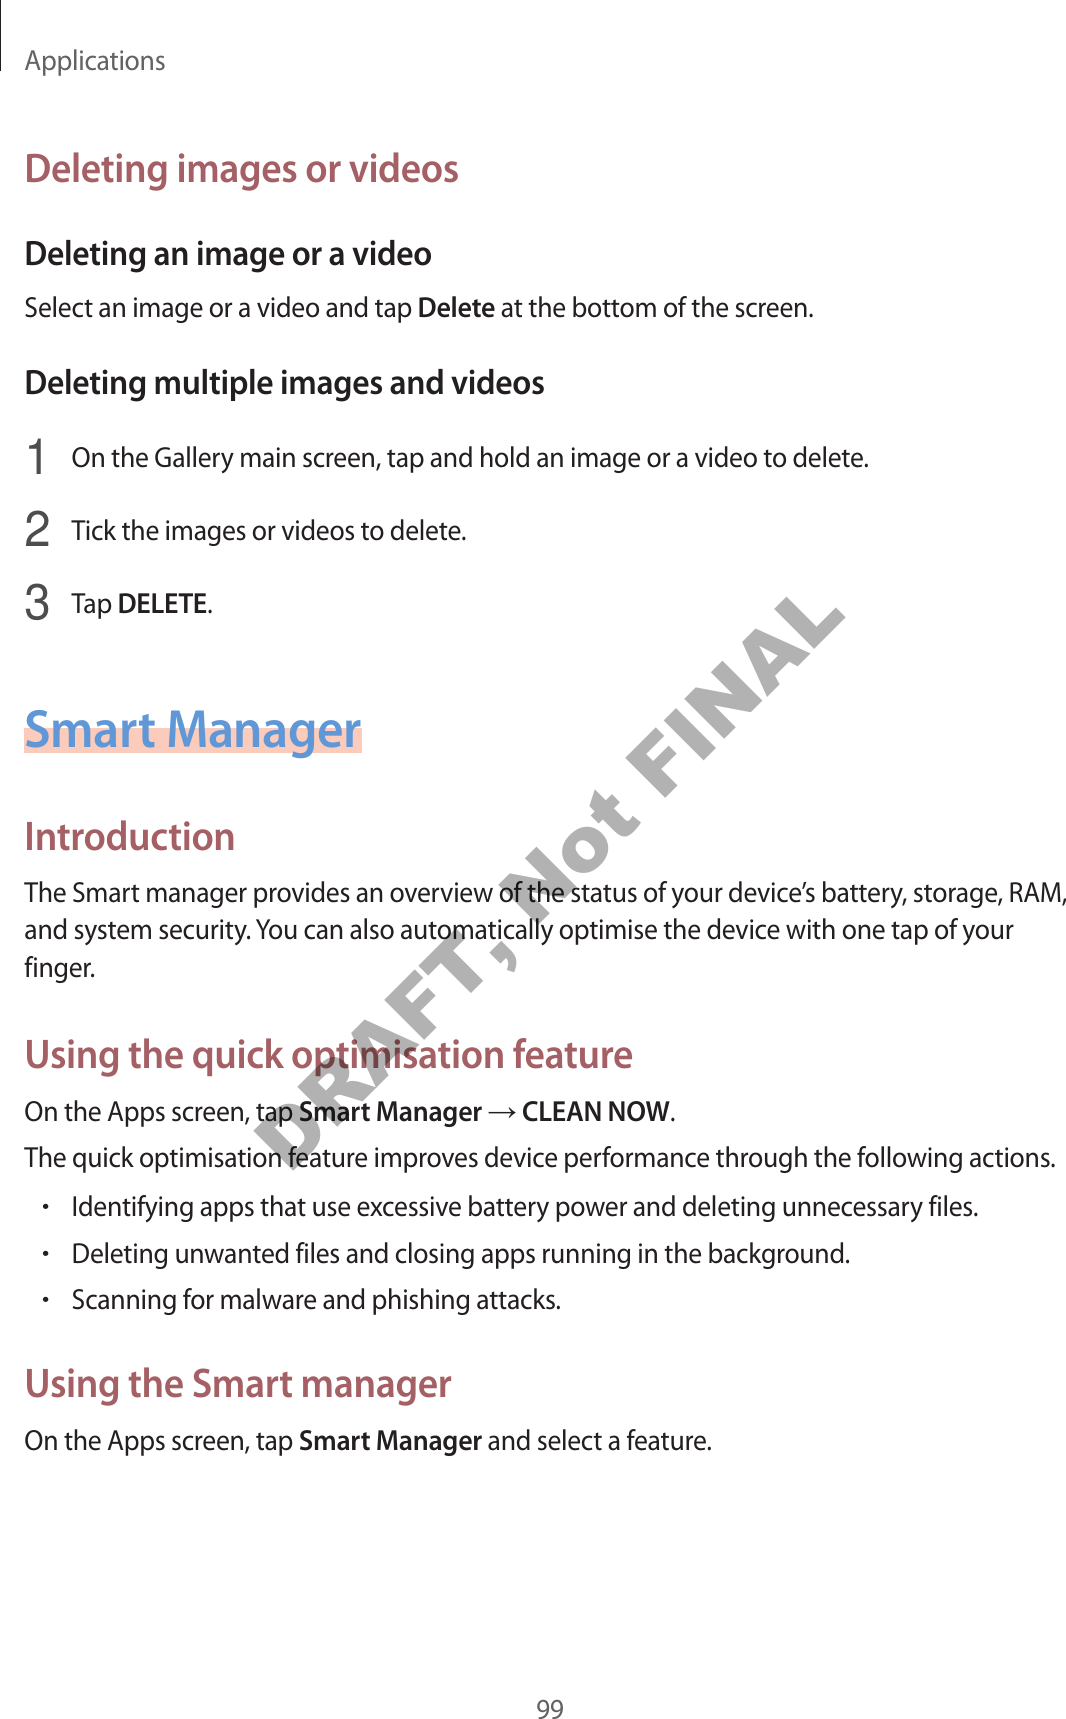 Applications99Deleting images or videosDeleting an image or a videoSelect an image or a video and tap Delete at the bottom of the screen.Deleting multiple images and videos1  On the Gallery main screen, tap and hold an image or a video to delete.2  Tick the images or videos to delete.3  Tap DELETE.Smart ManagerIntroductionThe Smart manager provides an overview of the status of your device’s battery, storage, RAM, and system security. You can also automatically optimise the device with one tap of your finger.Using the quick optimisation featureOn the Apps screen, tap Smart Manager  CLEAN NOW.The quick optimisation feature improves device performance through the following actions.•Identifying apps that use excessive battery power and deleting unnecessary files.•Deleting unwanted files and closing apps running in the background.•Scanning for malware and phishing attacks.Using the Smart managerOn the Apps screen, tap Smart Manager and select a feature.DRAFT, Not FINAL